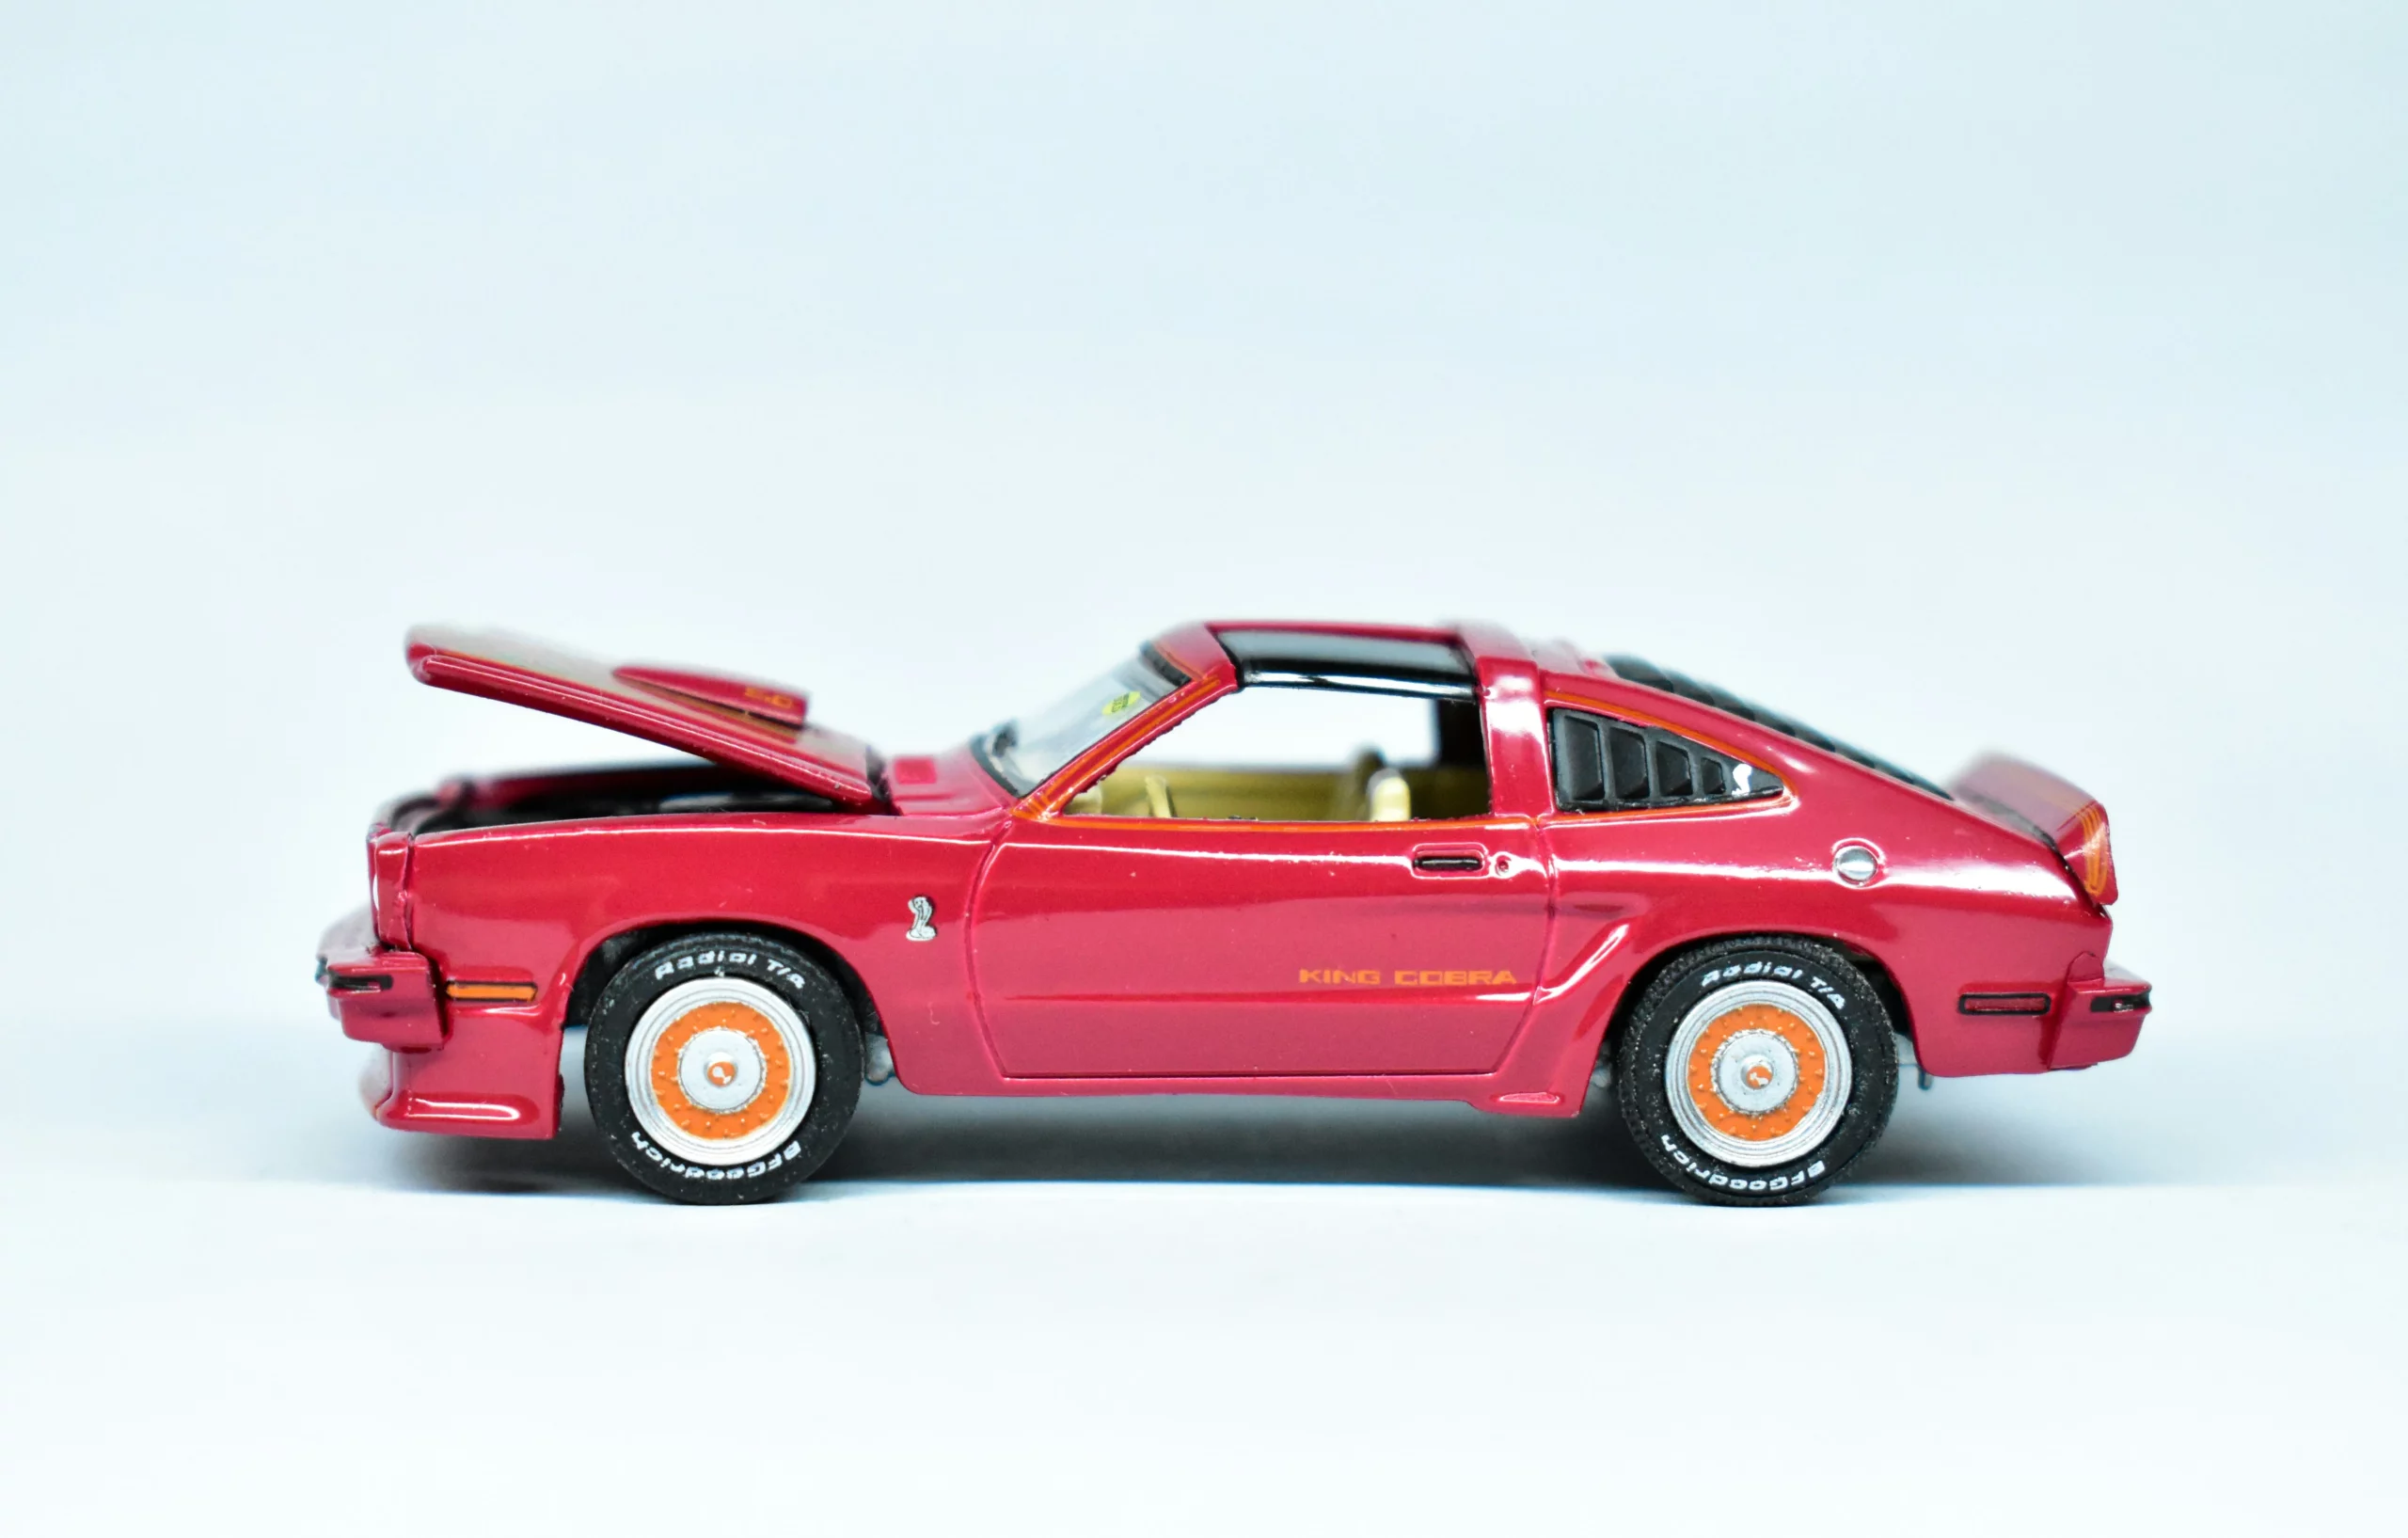 A red model car collection item with the hood open. The background is a very pale blue.